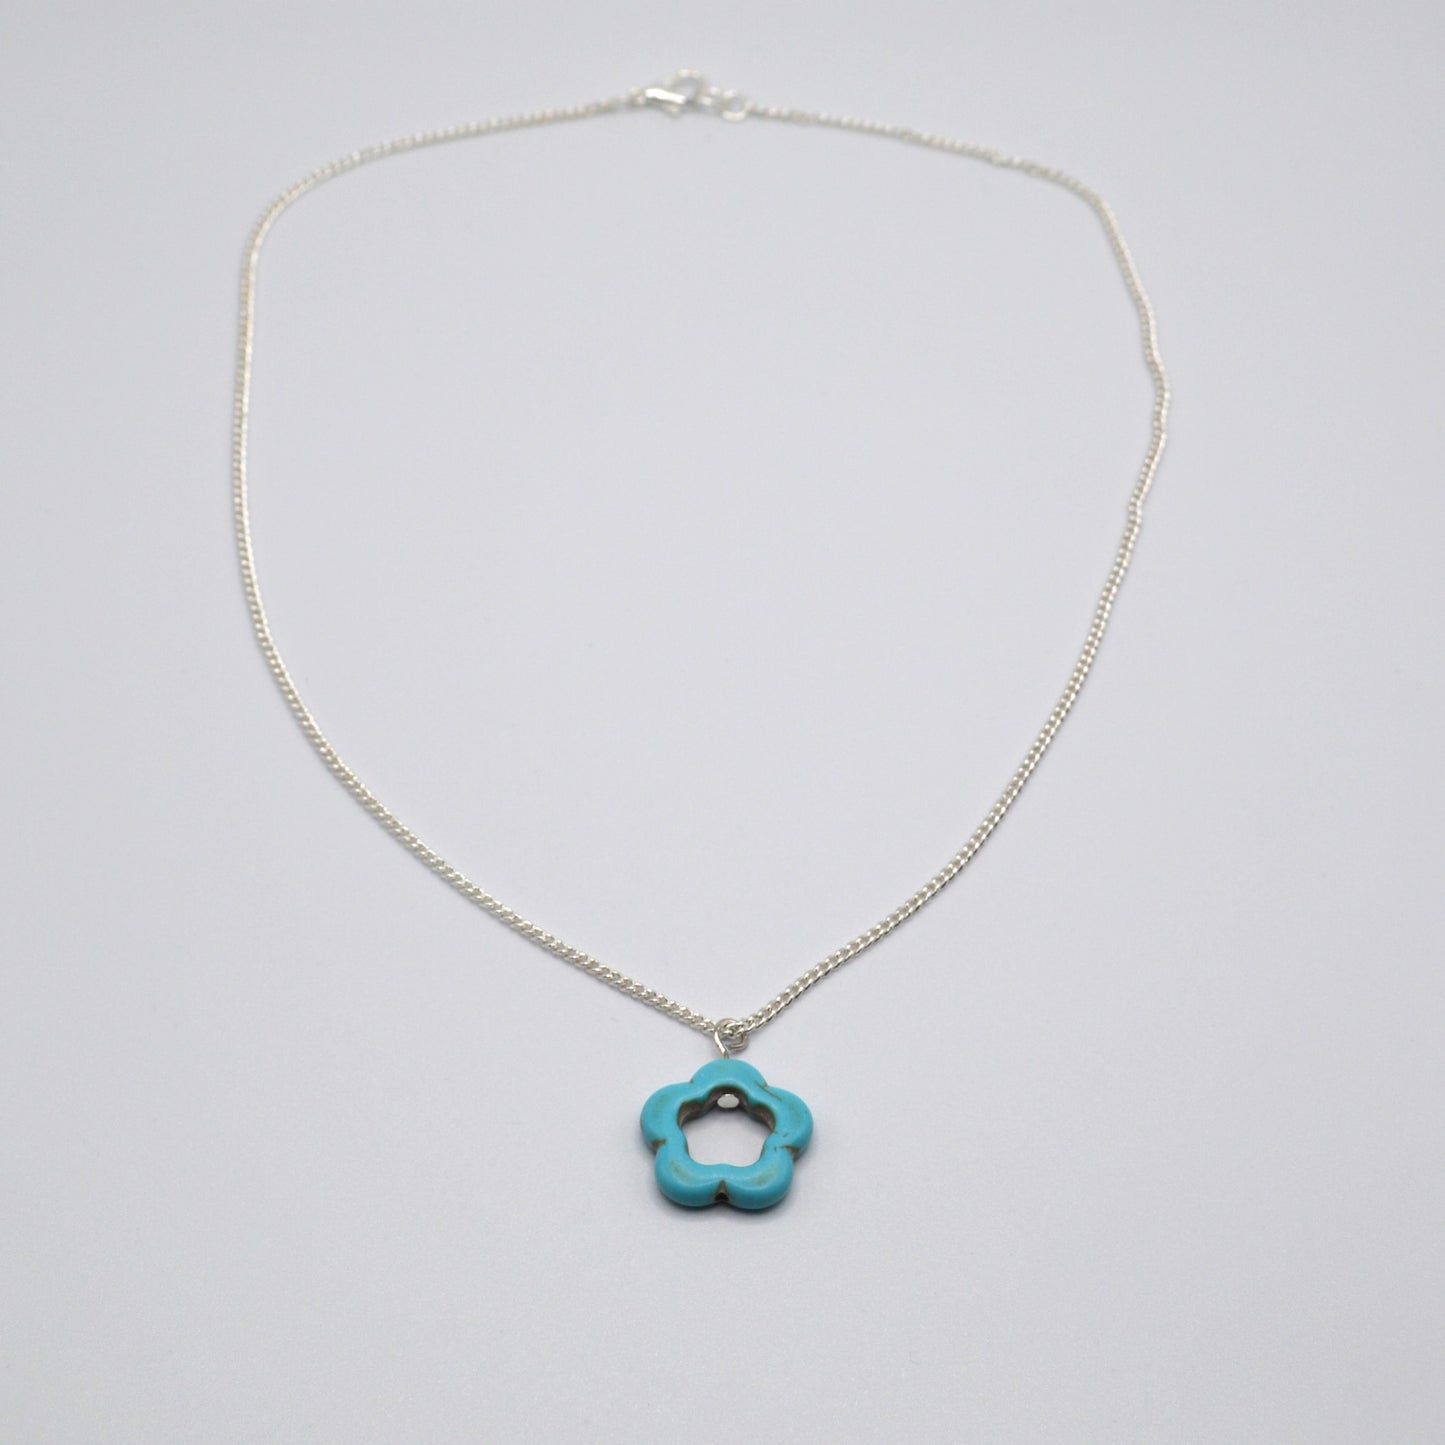 Small Magnesite Flower Pendant Necklace (Turquoise)